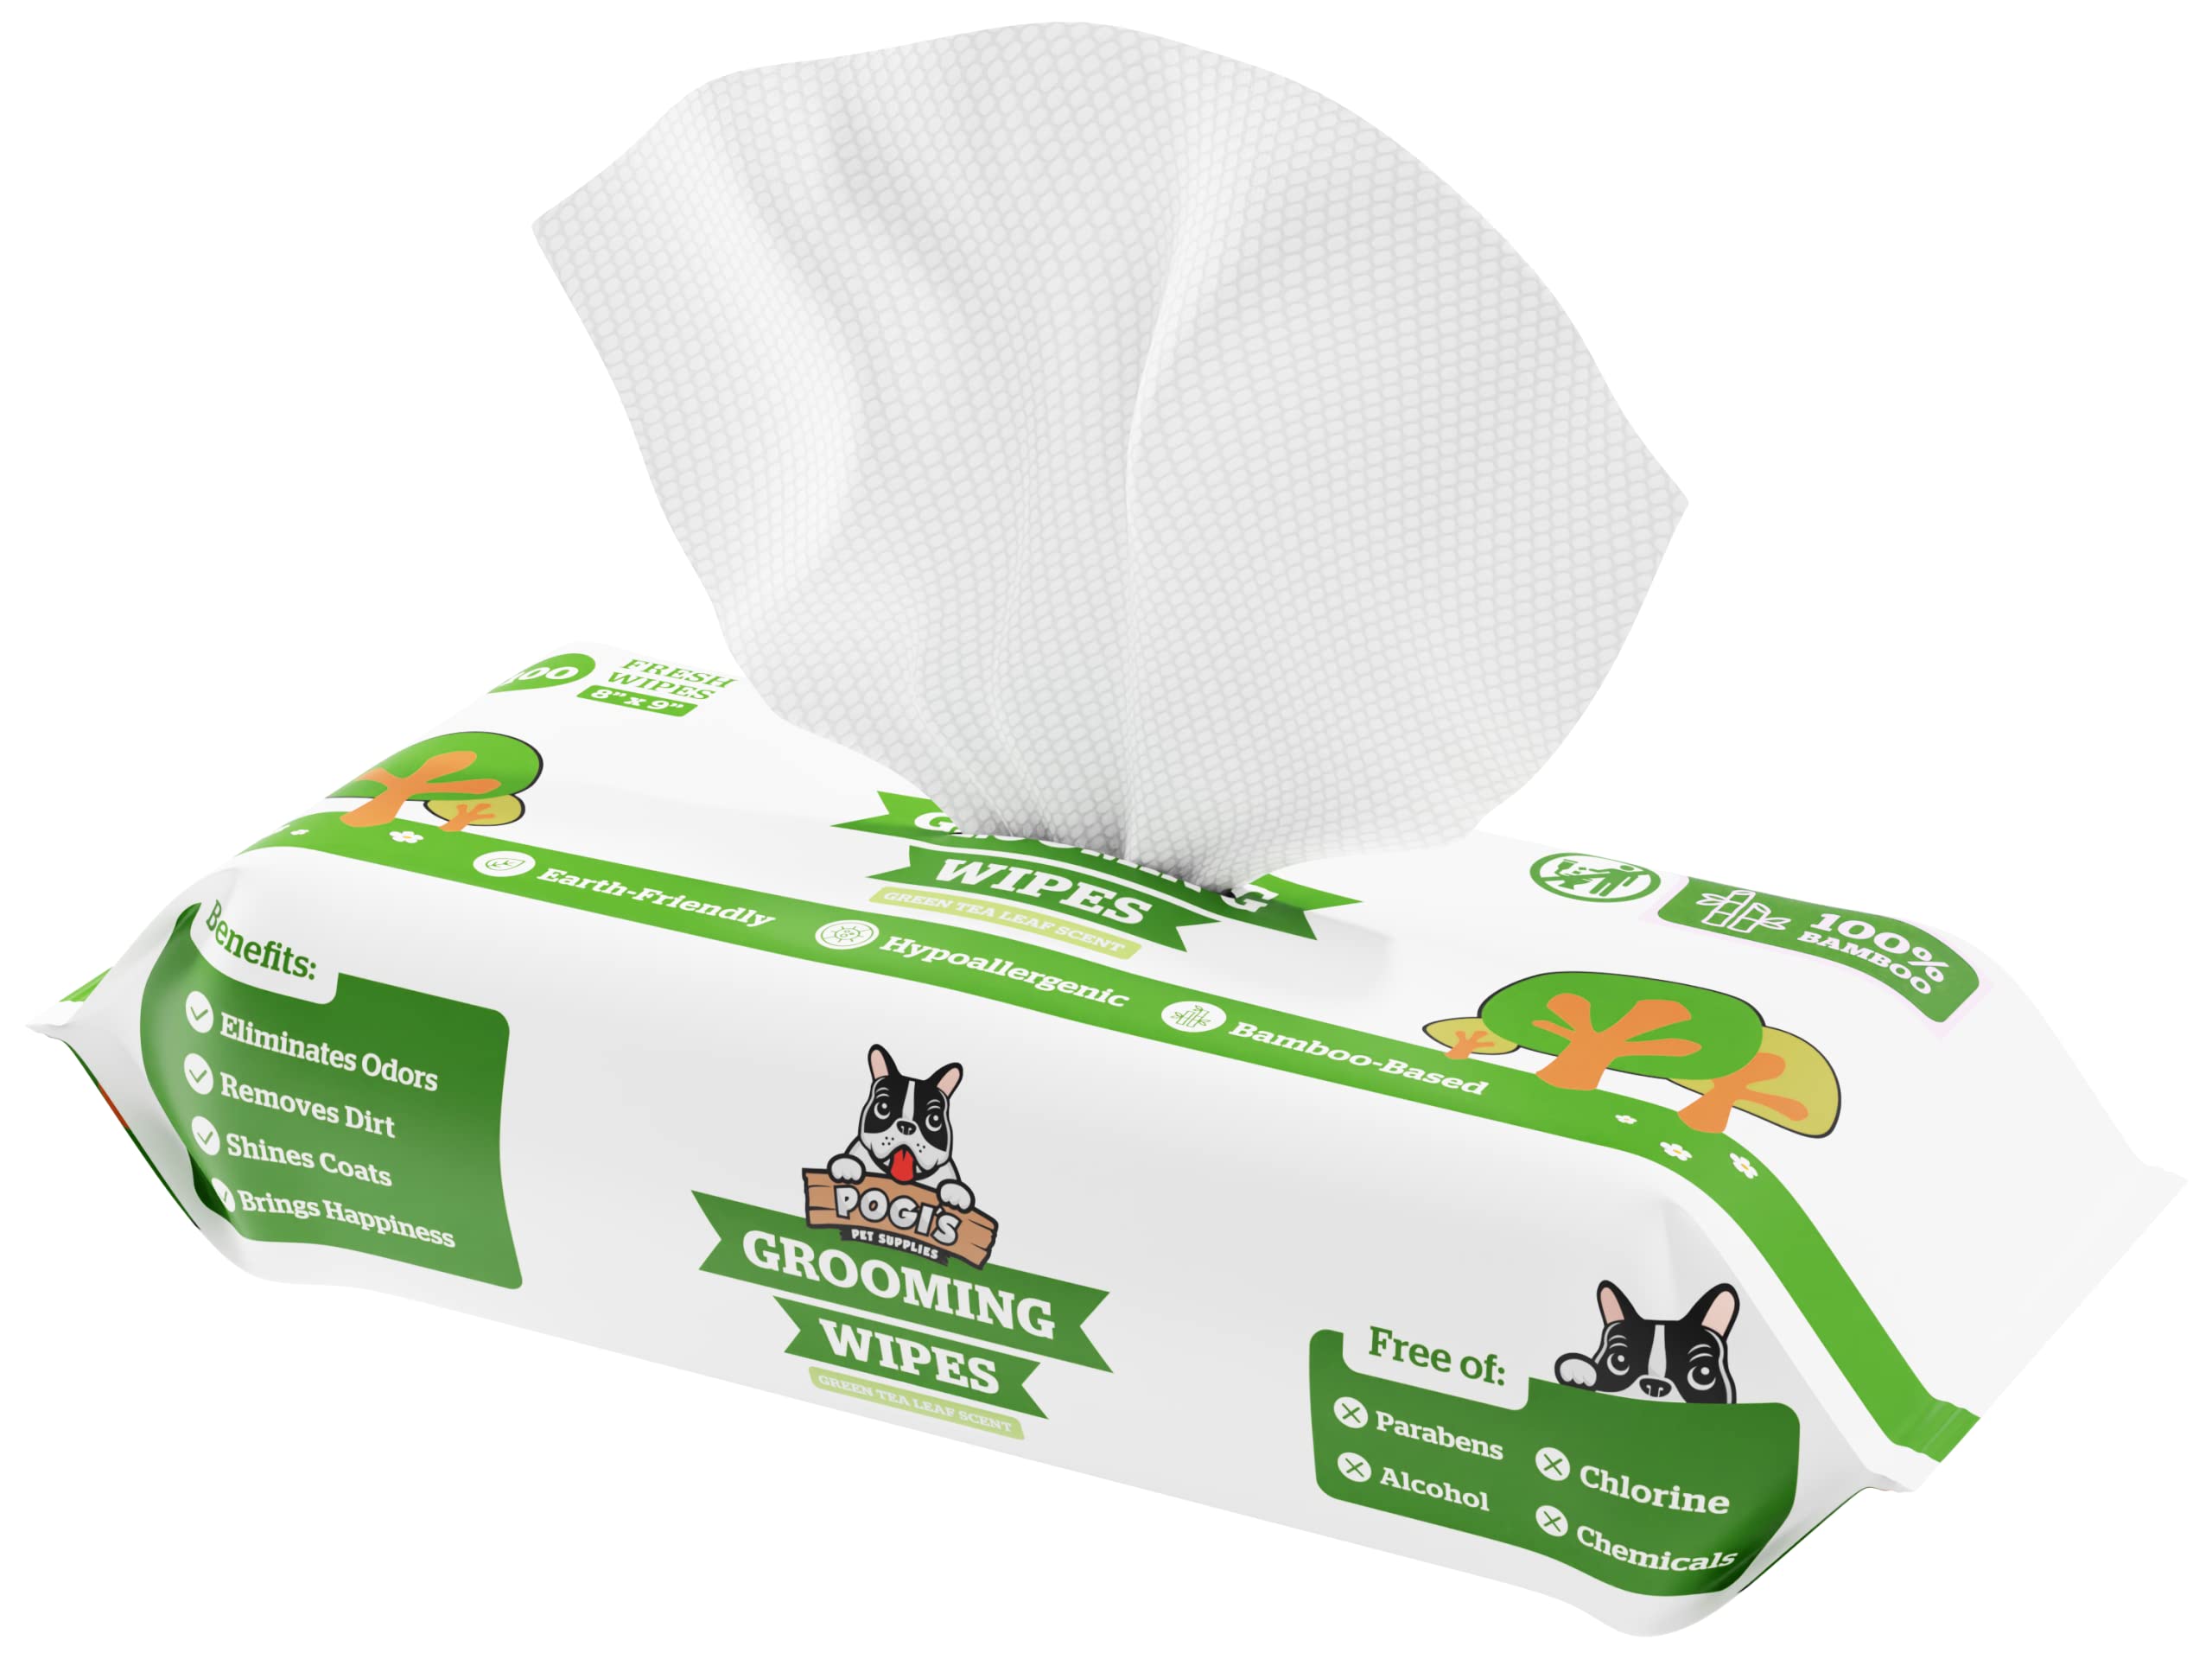 Book Cover Pogi's Dog Grooming Wipes - 100 Dog Wipes for Cleaning and Deodorizing - Plant-Based, Hypoallergenic Pet Wipes for Dogs, Puppy Wipes - Quick Bath Dog Wipes for Paws, Butt, & Body - Green Tea Scented 100-Count Wipes Green Tea Leaf Scented